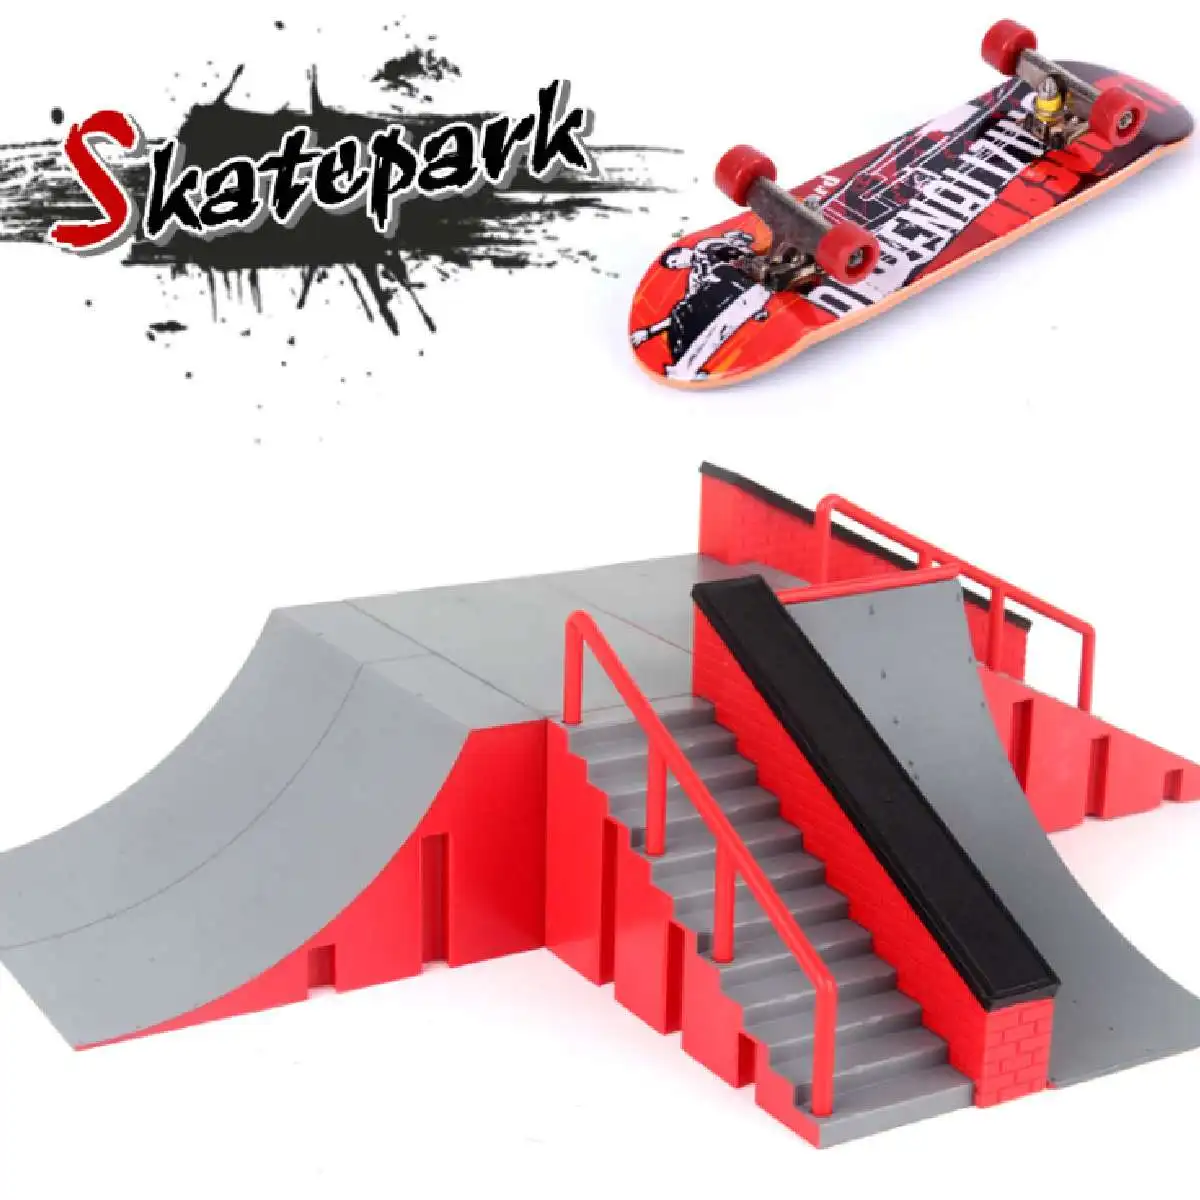 Mini Skateboard and Ramp Set Kids Children Park Outdoor Sports Game Toy Gift 